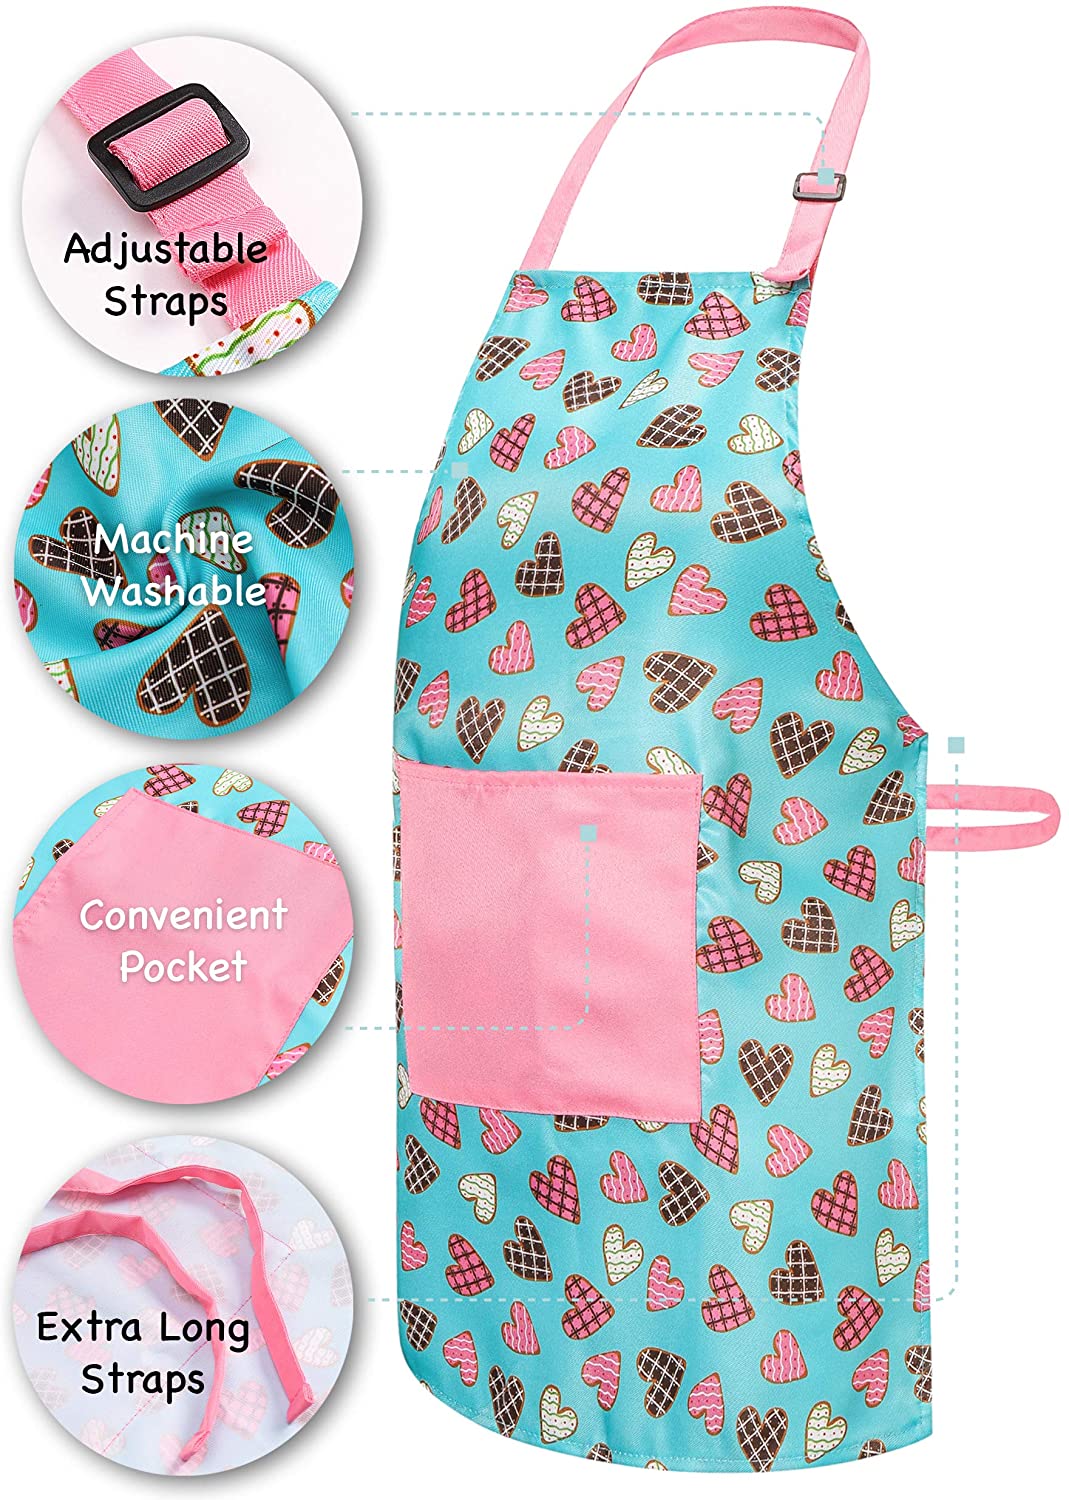 RiseBrite Kids Apron, Chef Hat And Mitt Set Is Made Of Durable Material That Is Meant To Last